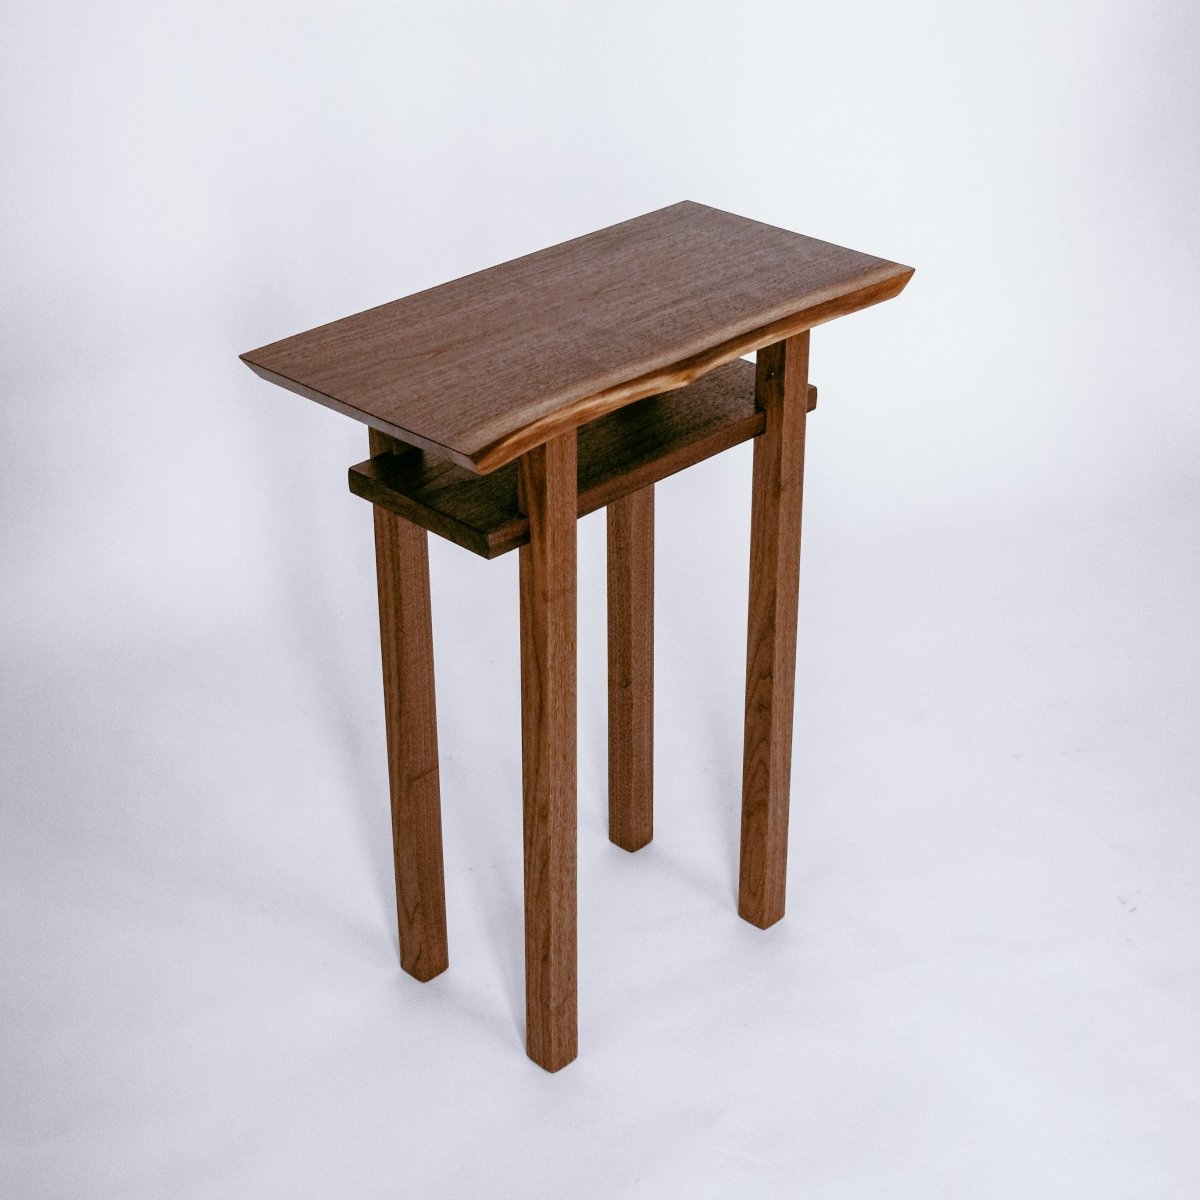 a modern walnut end table with shelf by Mokuzai Furniture- modern wood furniture designs for small spaces